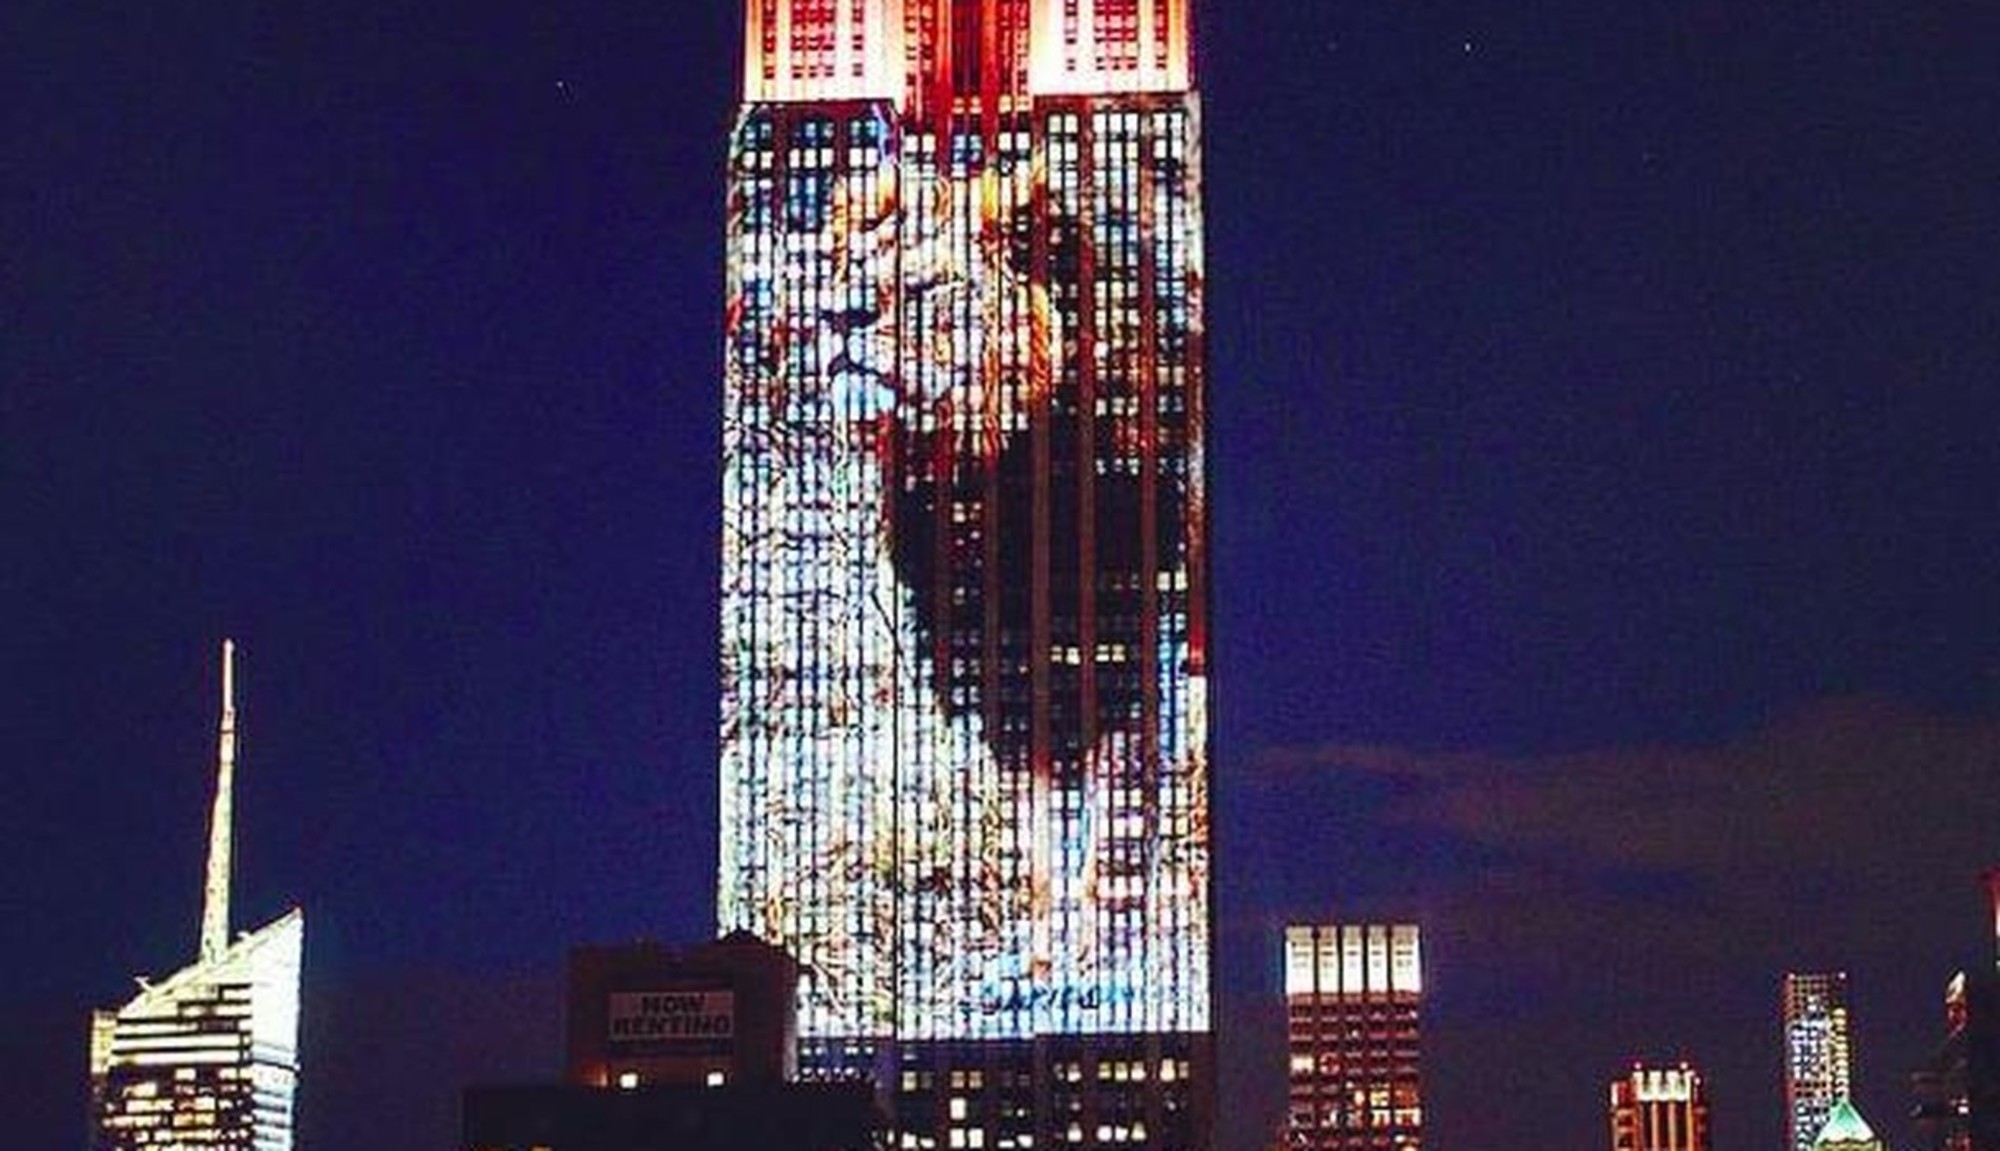 Pro-life billboard removed in NYC, but Empire State Building lights up for Cecil